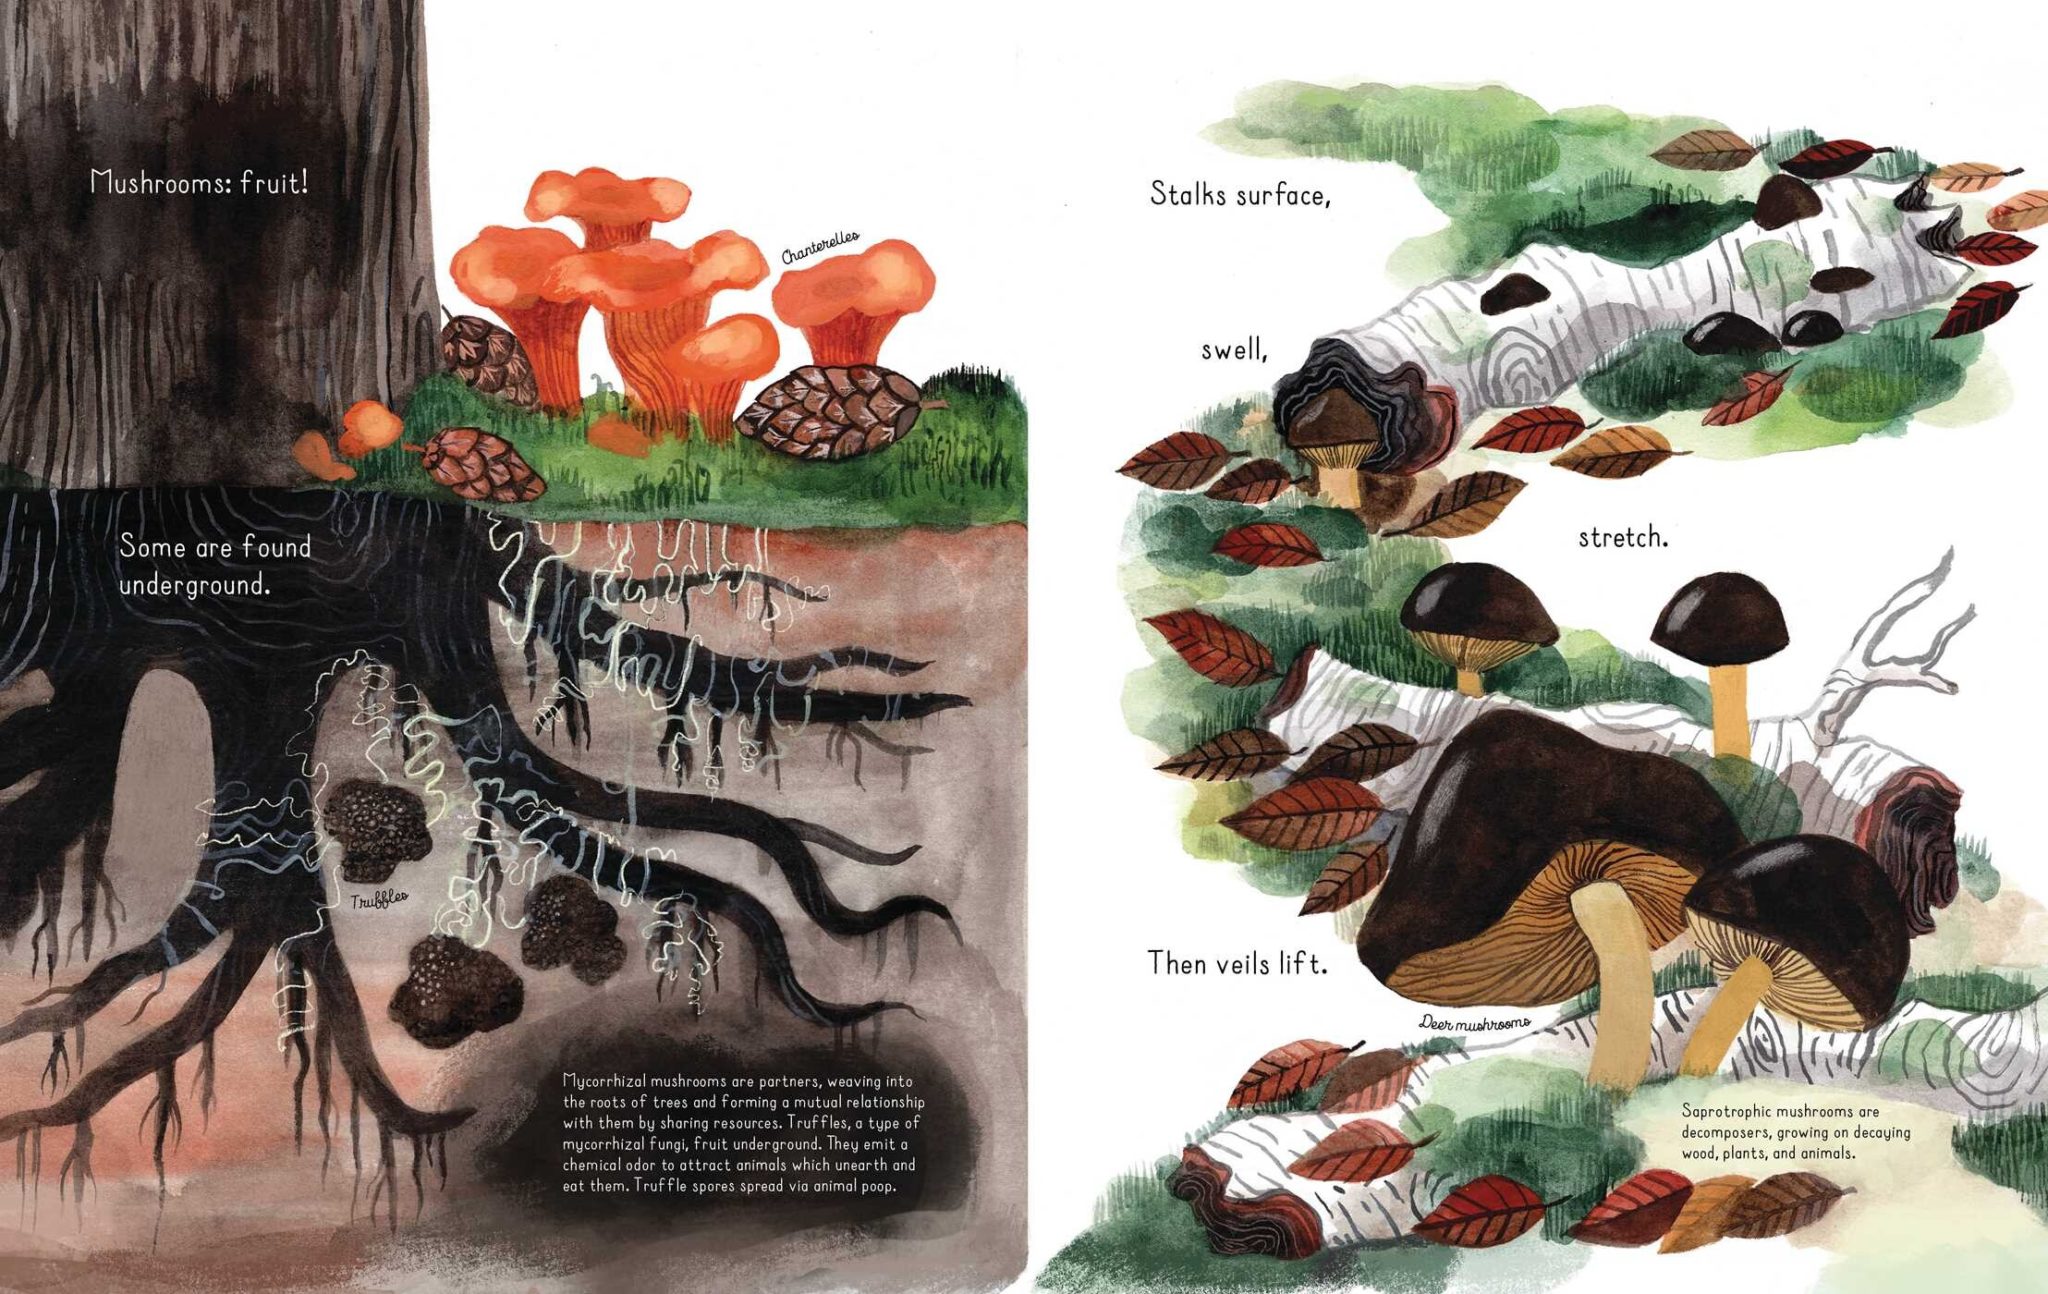 Page detail from the children's nonfiction picture book, "Fungi Grow," detailing how mushrooms visibly "fruit" from hidden fungal roots or mycelium buried deep underground. The particular fungi highlighted on this spread include the Chanterelle, the Truffle, and the Deer mushroom. 